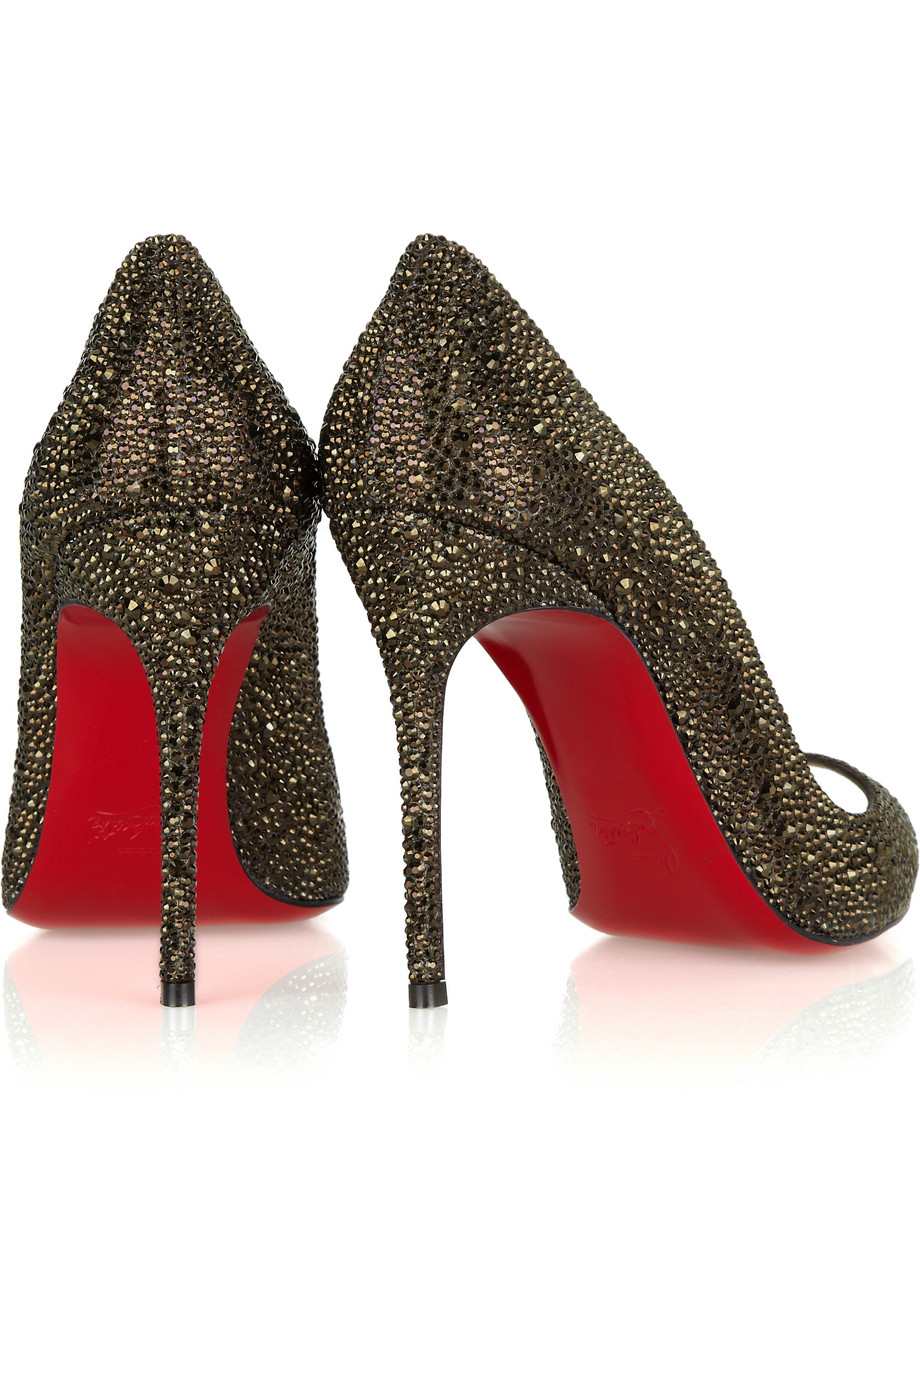 How To Authenticate Christian Louboutin Heels | Luxity